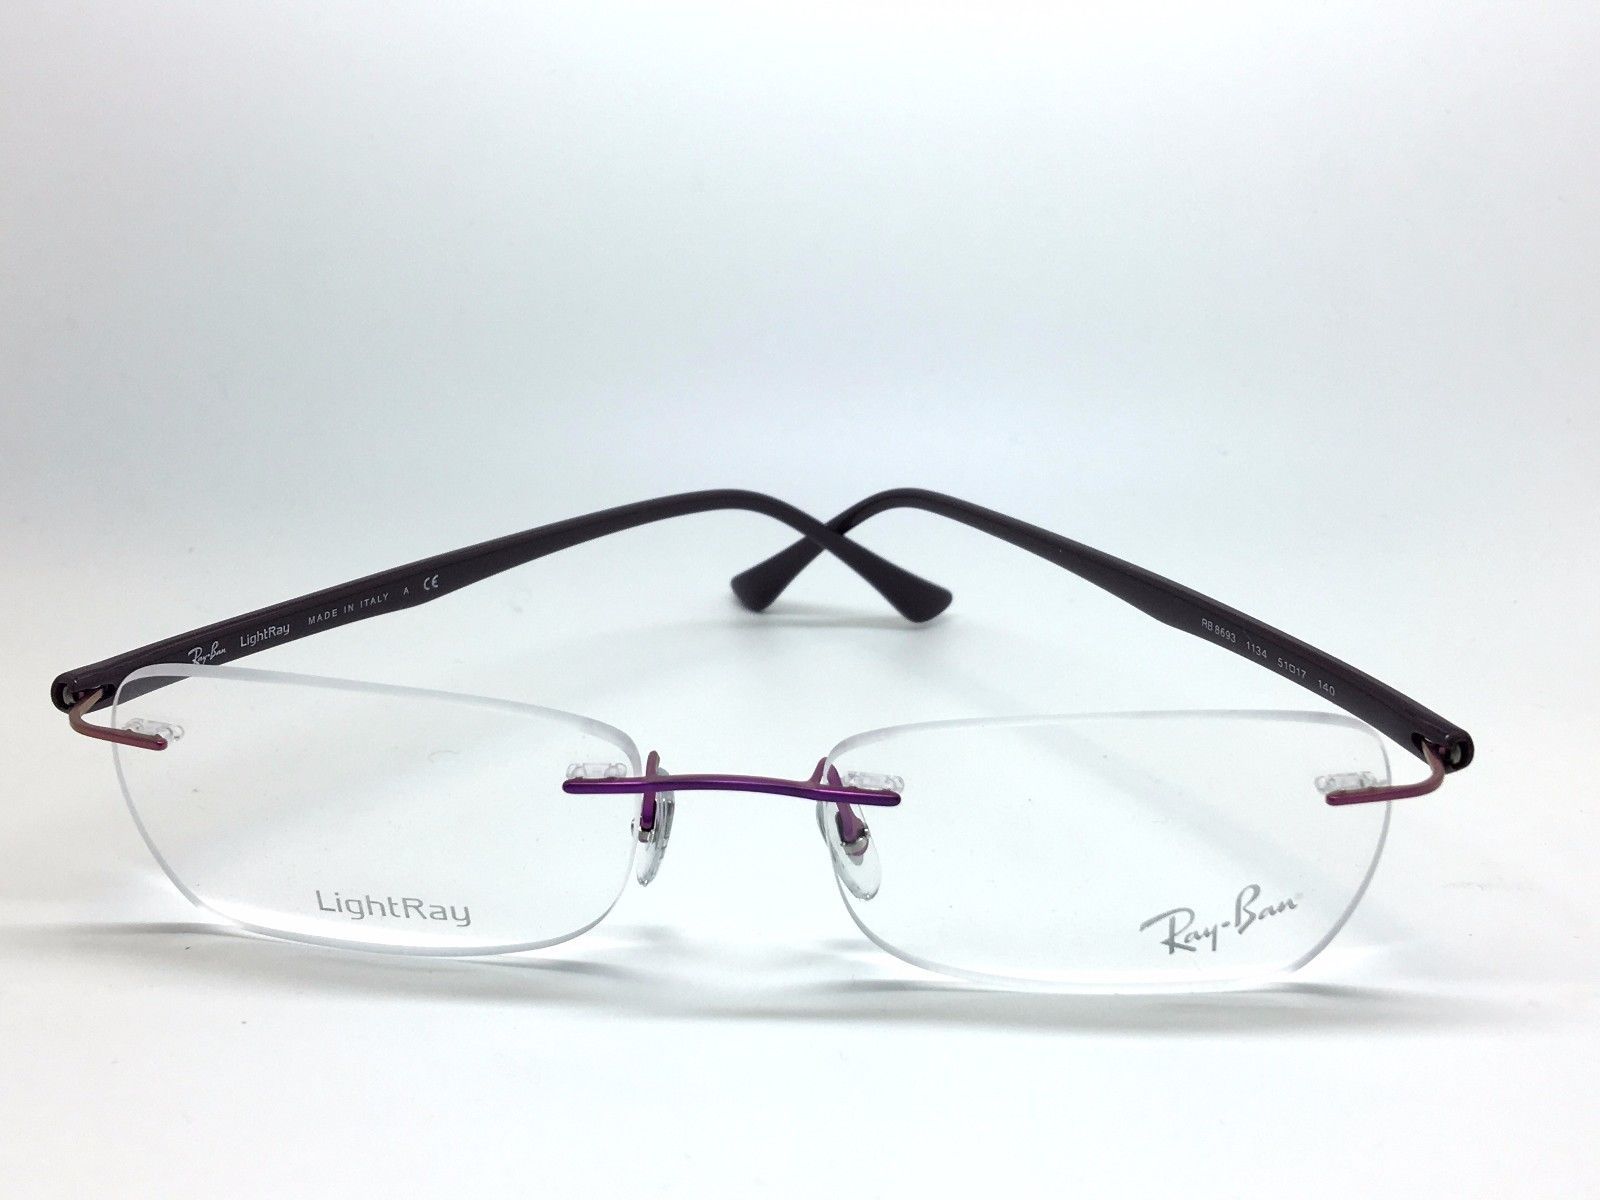 RAY-BAN RIMLESS LIGHT RAY TITANIUM PINK/VIOLET RB 8693 1134 51mm ...